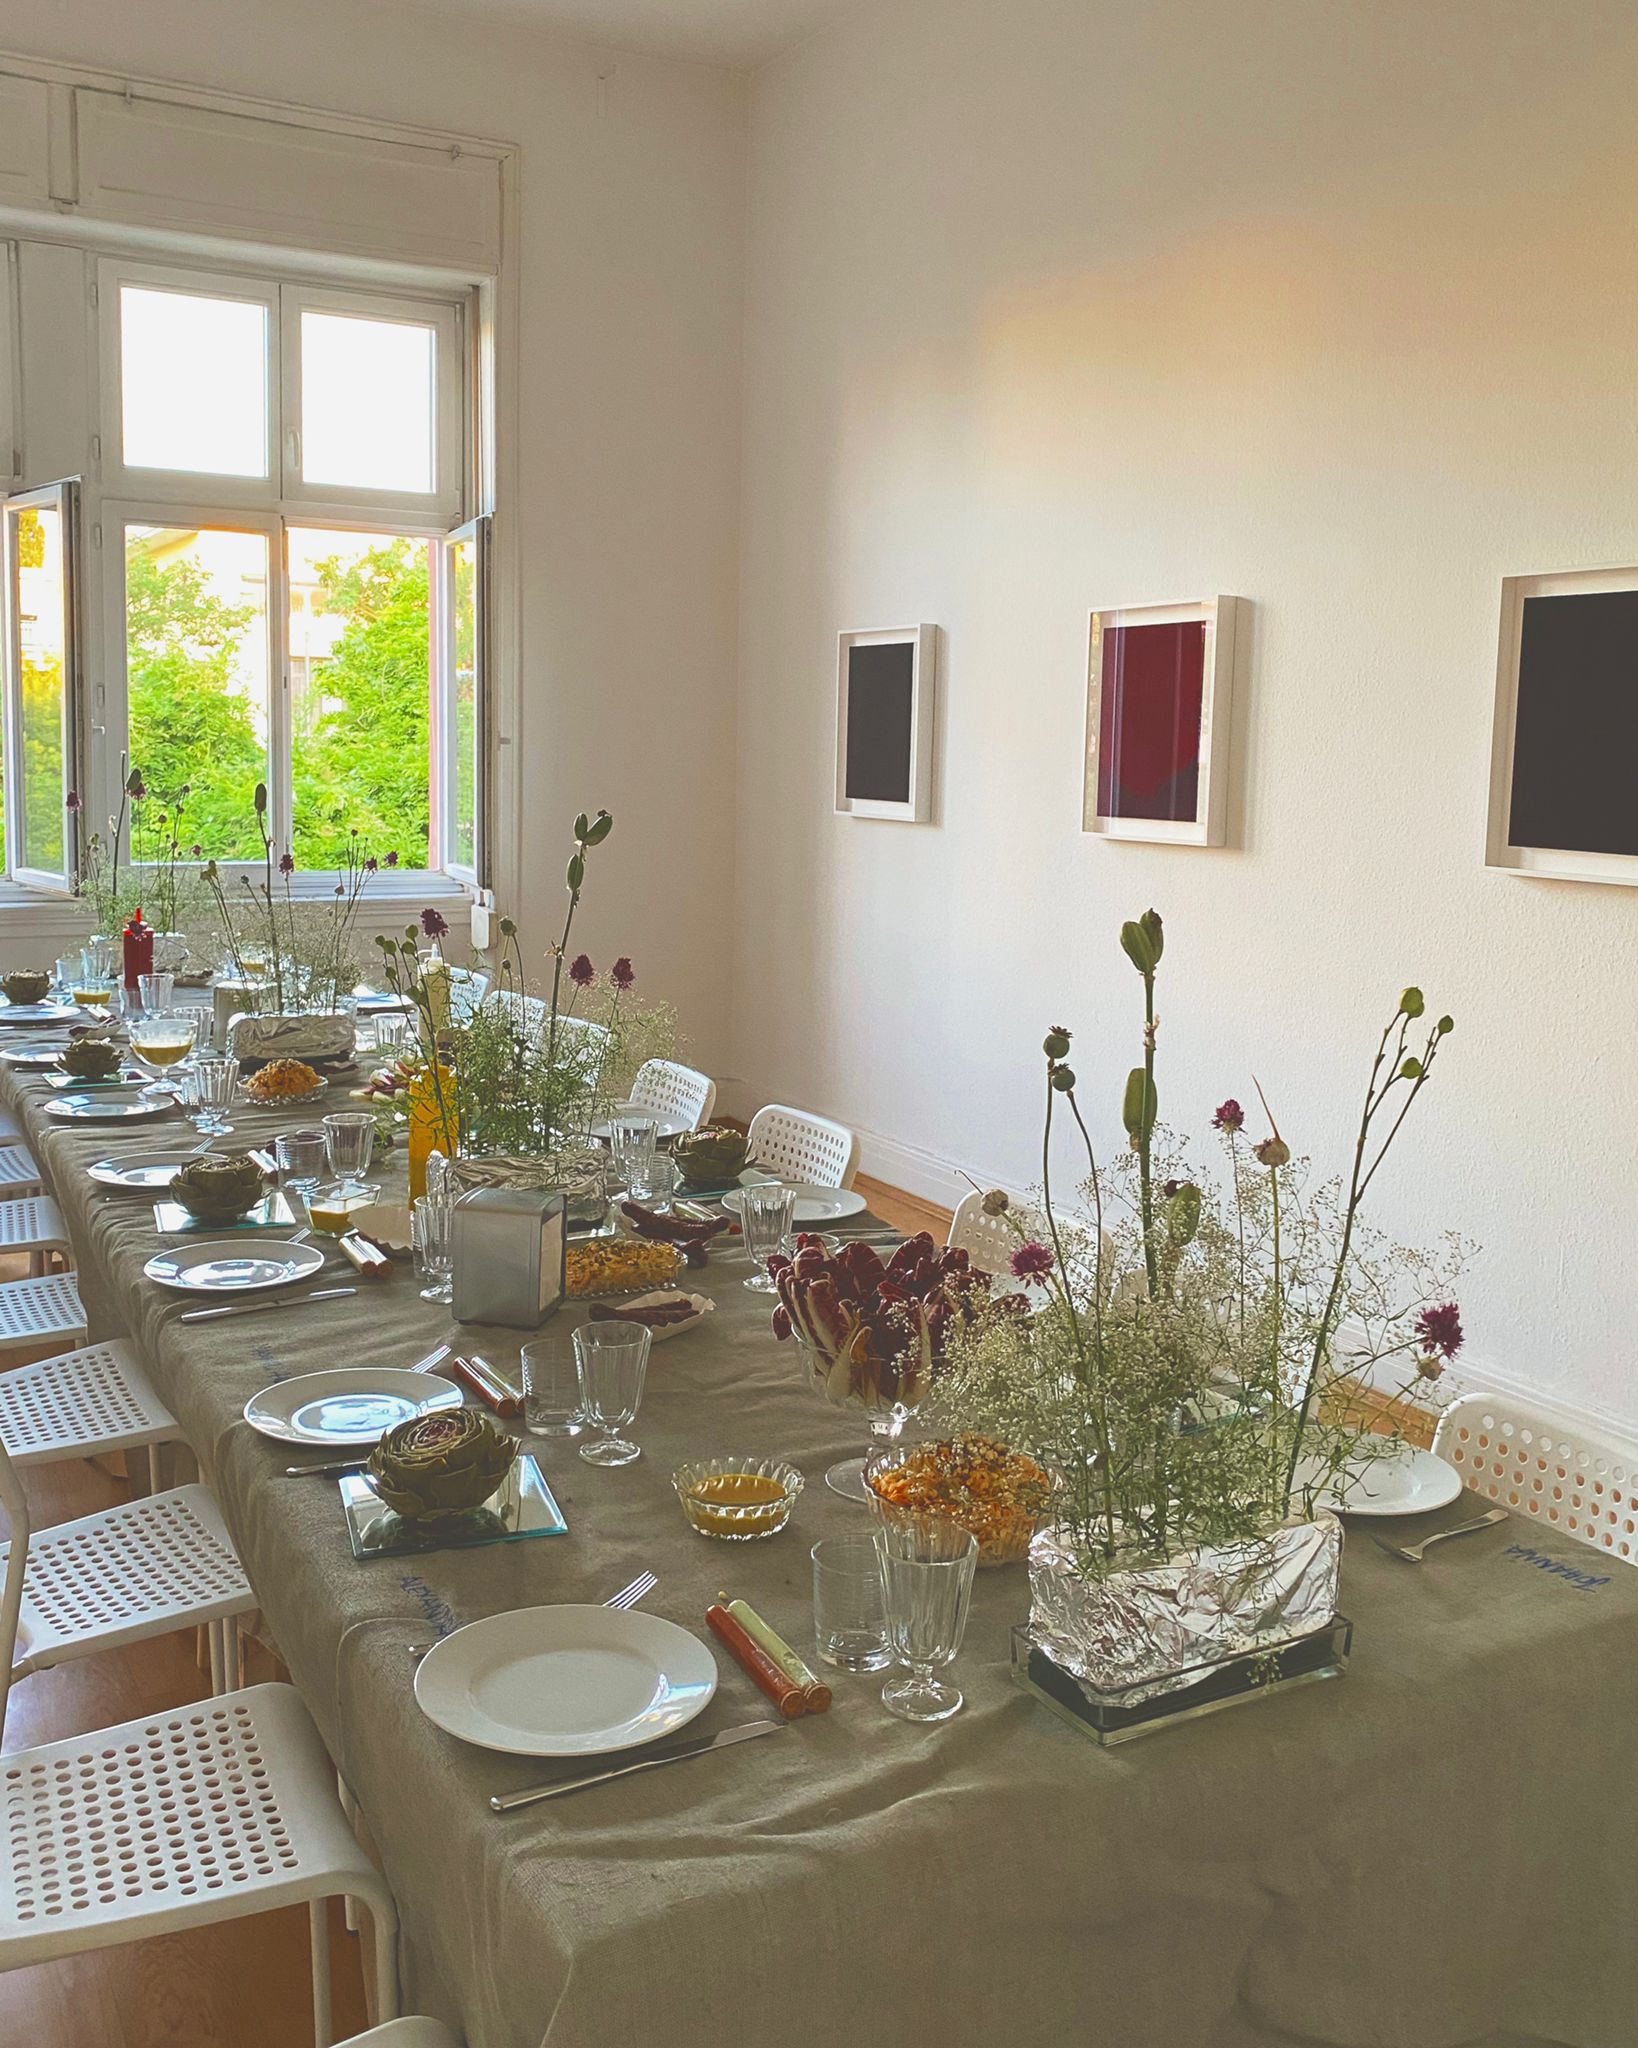 Paul | Pommes | Pimms | an exclusive salon evening and staged dinner in the exhibition with the artist | 05.07. — 05.07.2022